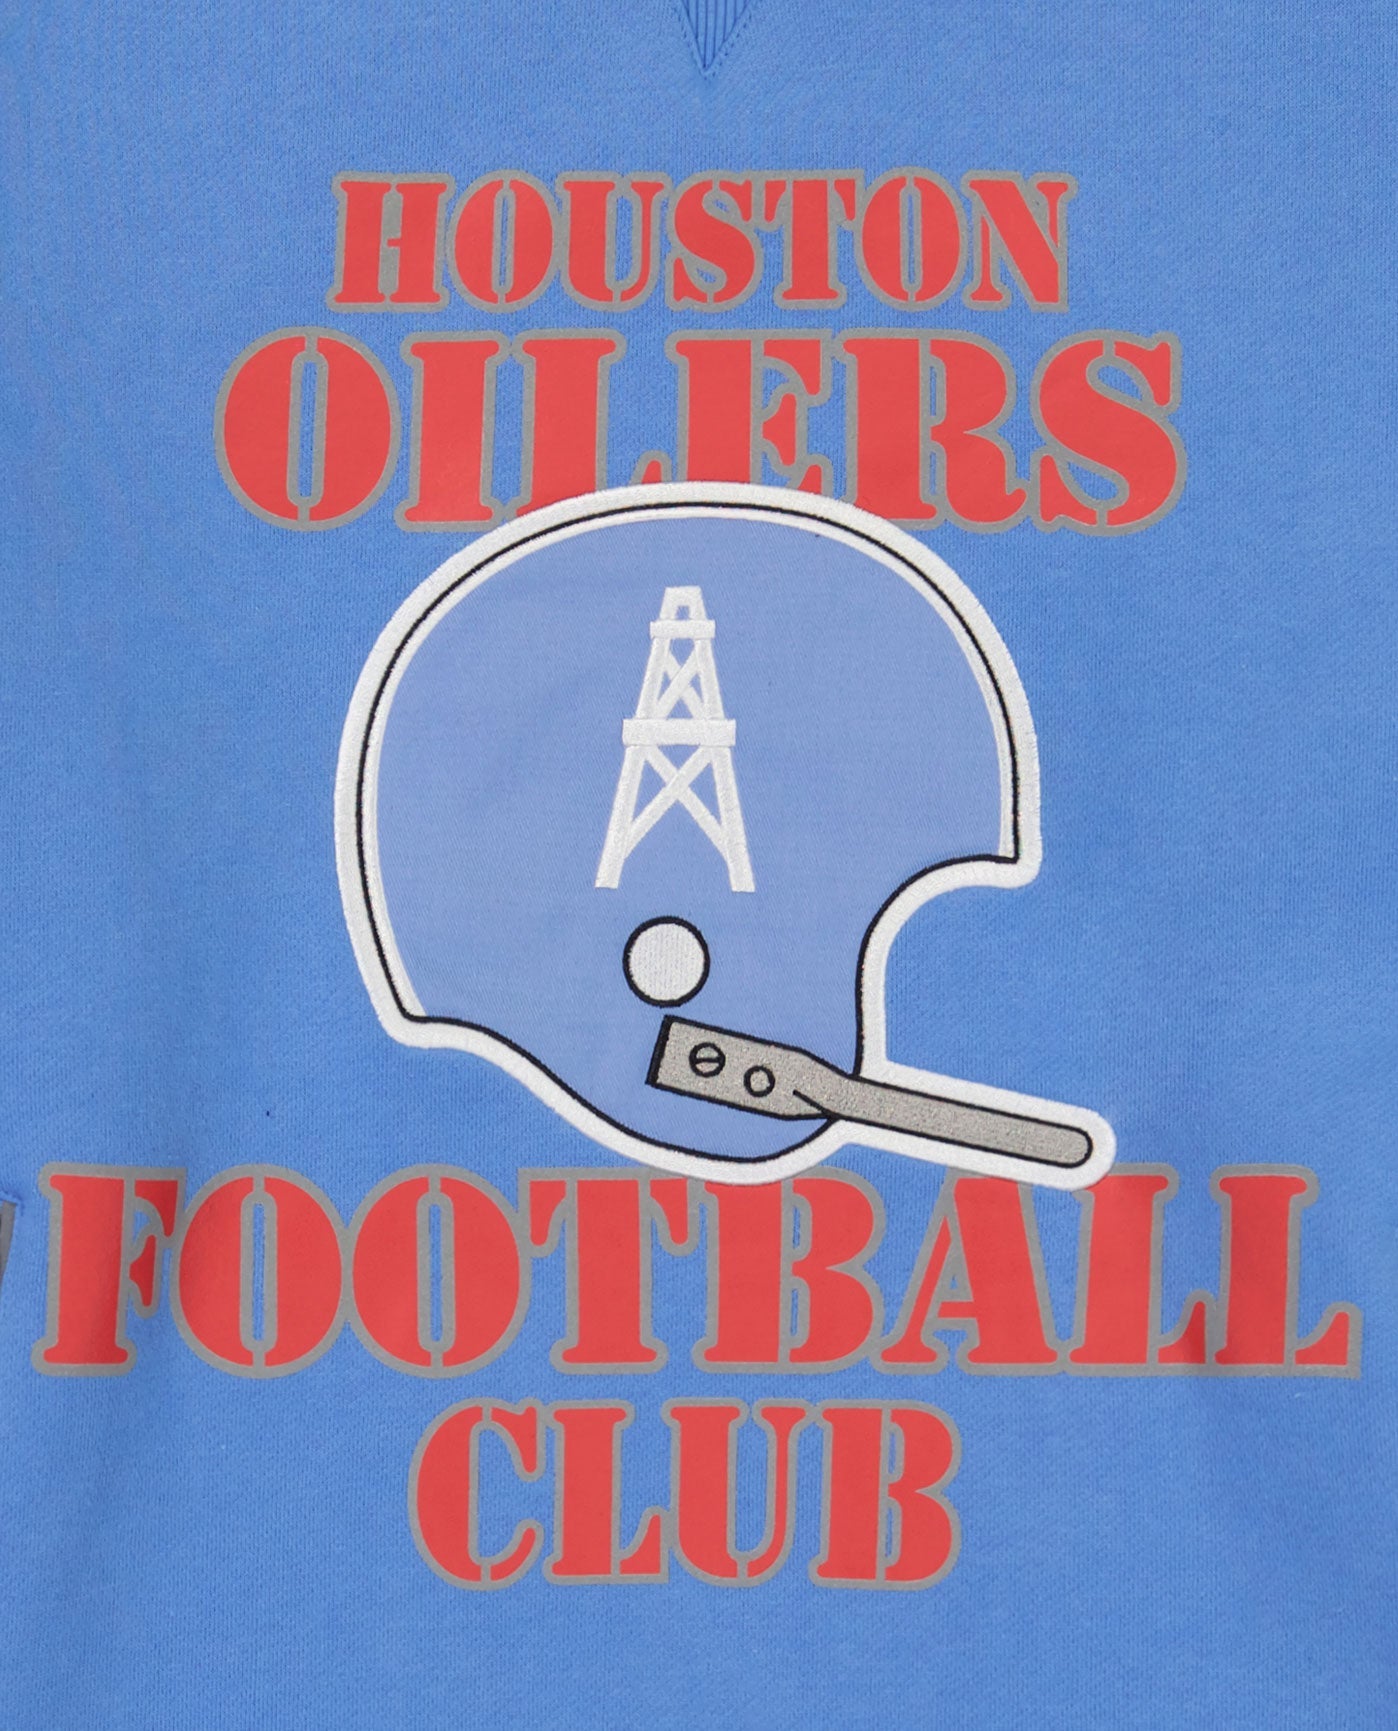 HOUSTON OILERS FOOTBALL CLUBS writing and helmet logo front | Oilers Light Blue